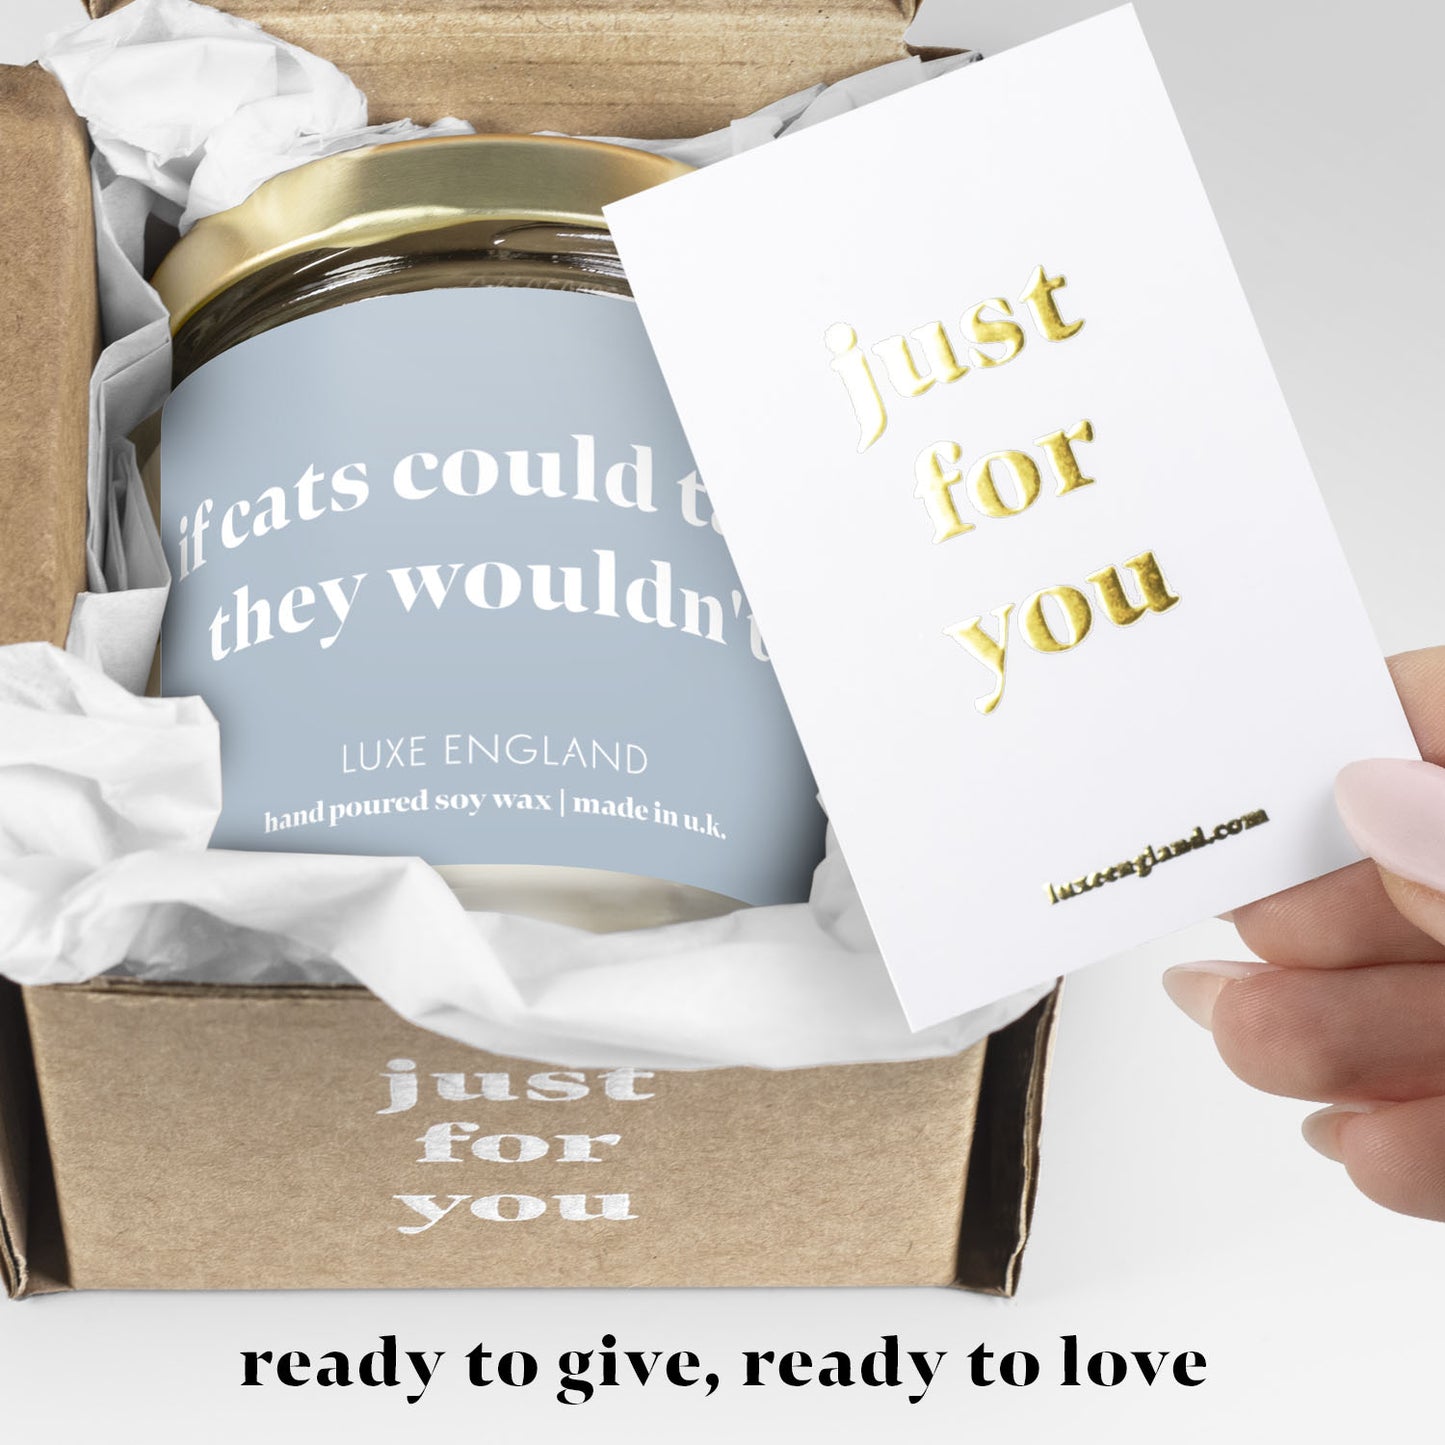 Message Candle (if cats could talk, they wouldn't)